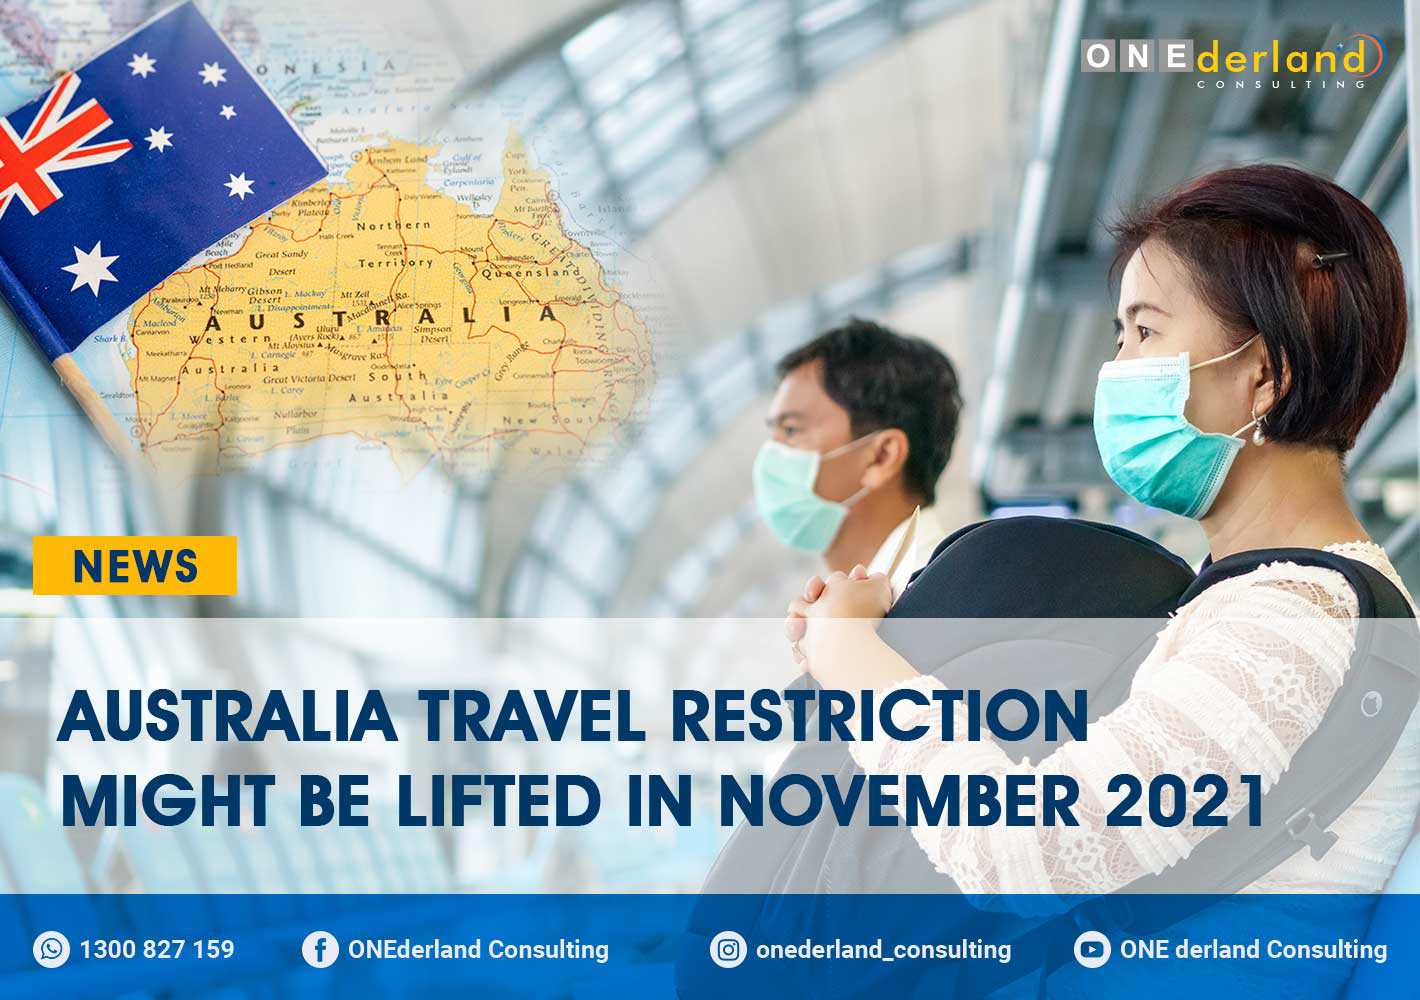 Australia travel restriction might be lifted in November 2021